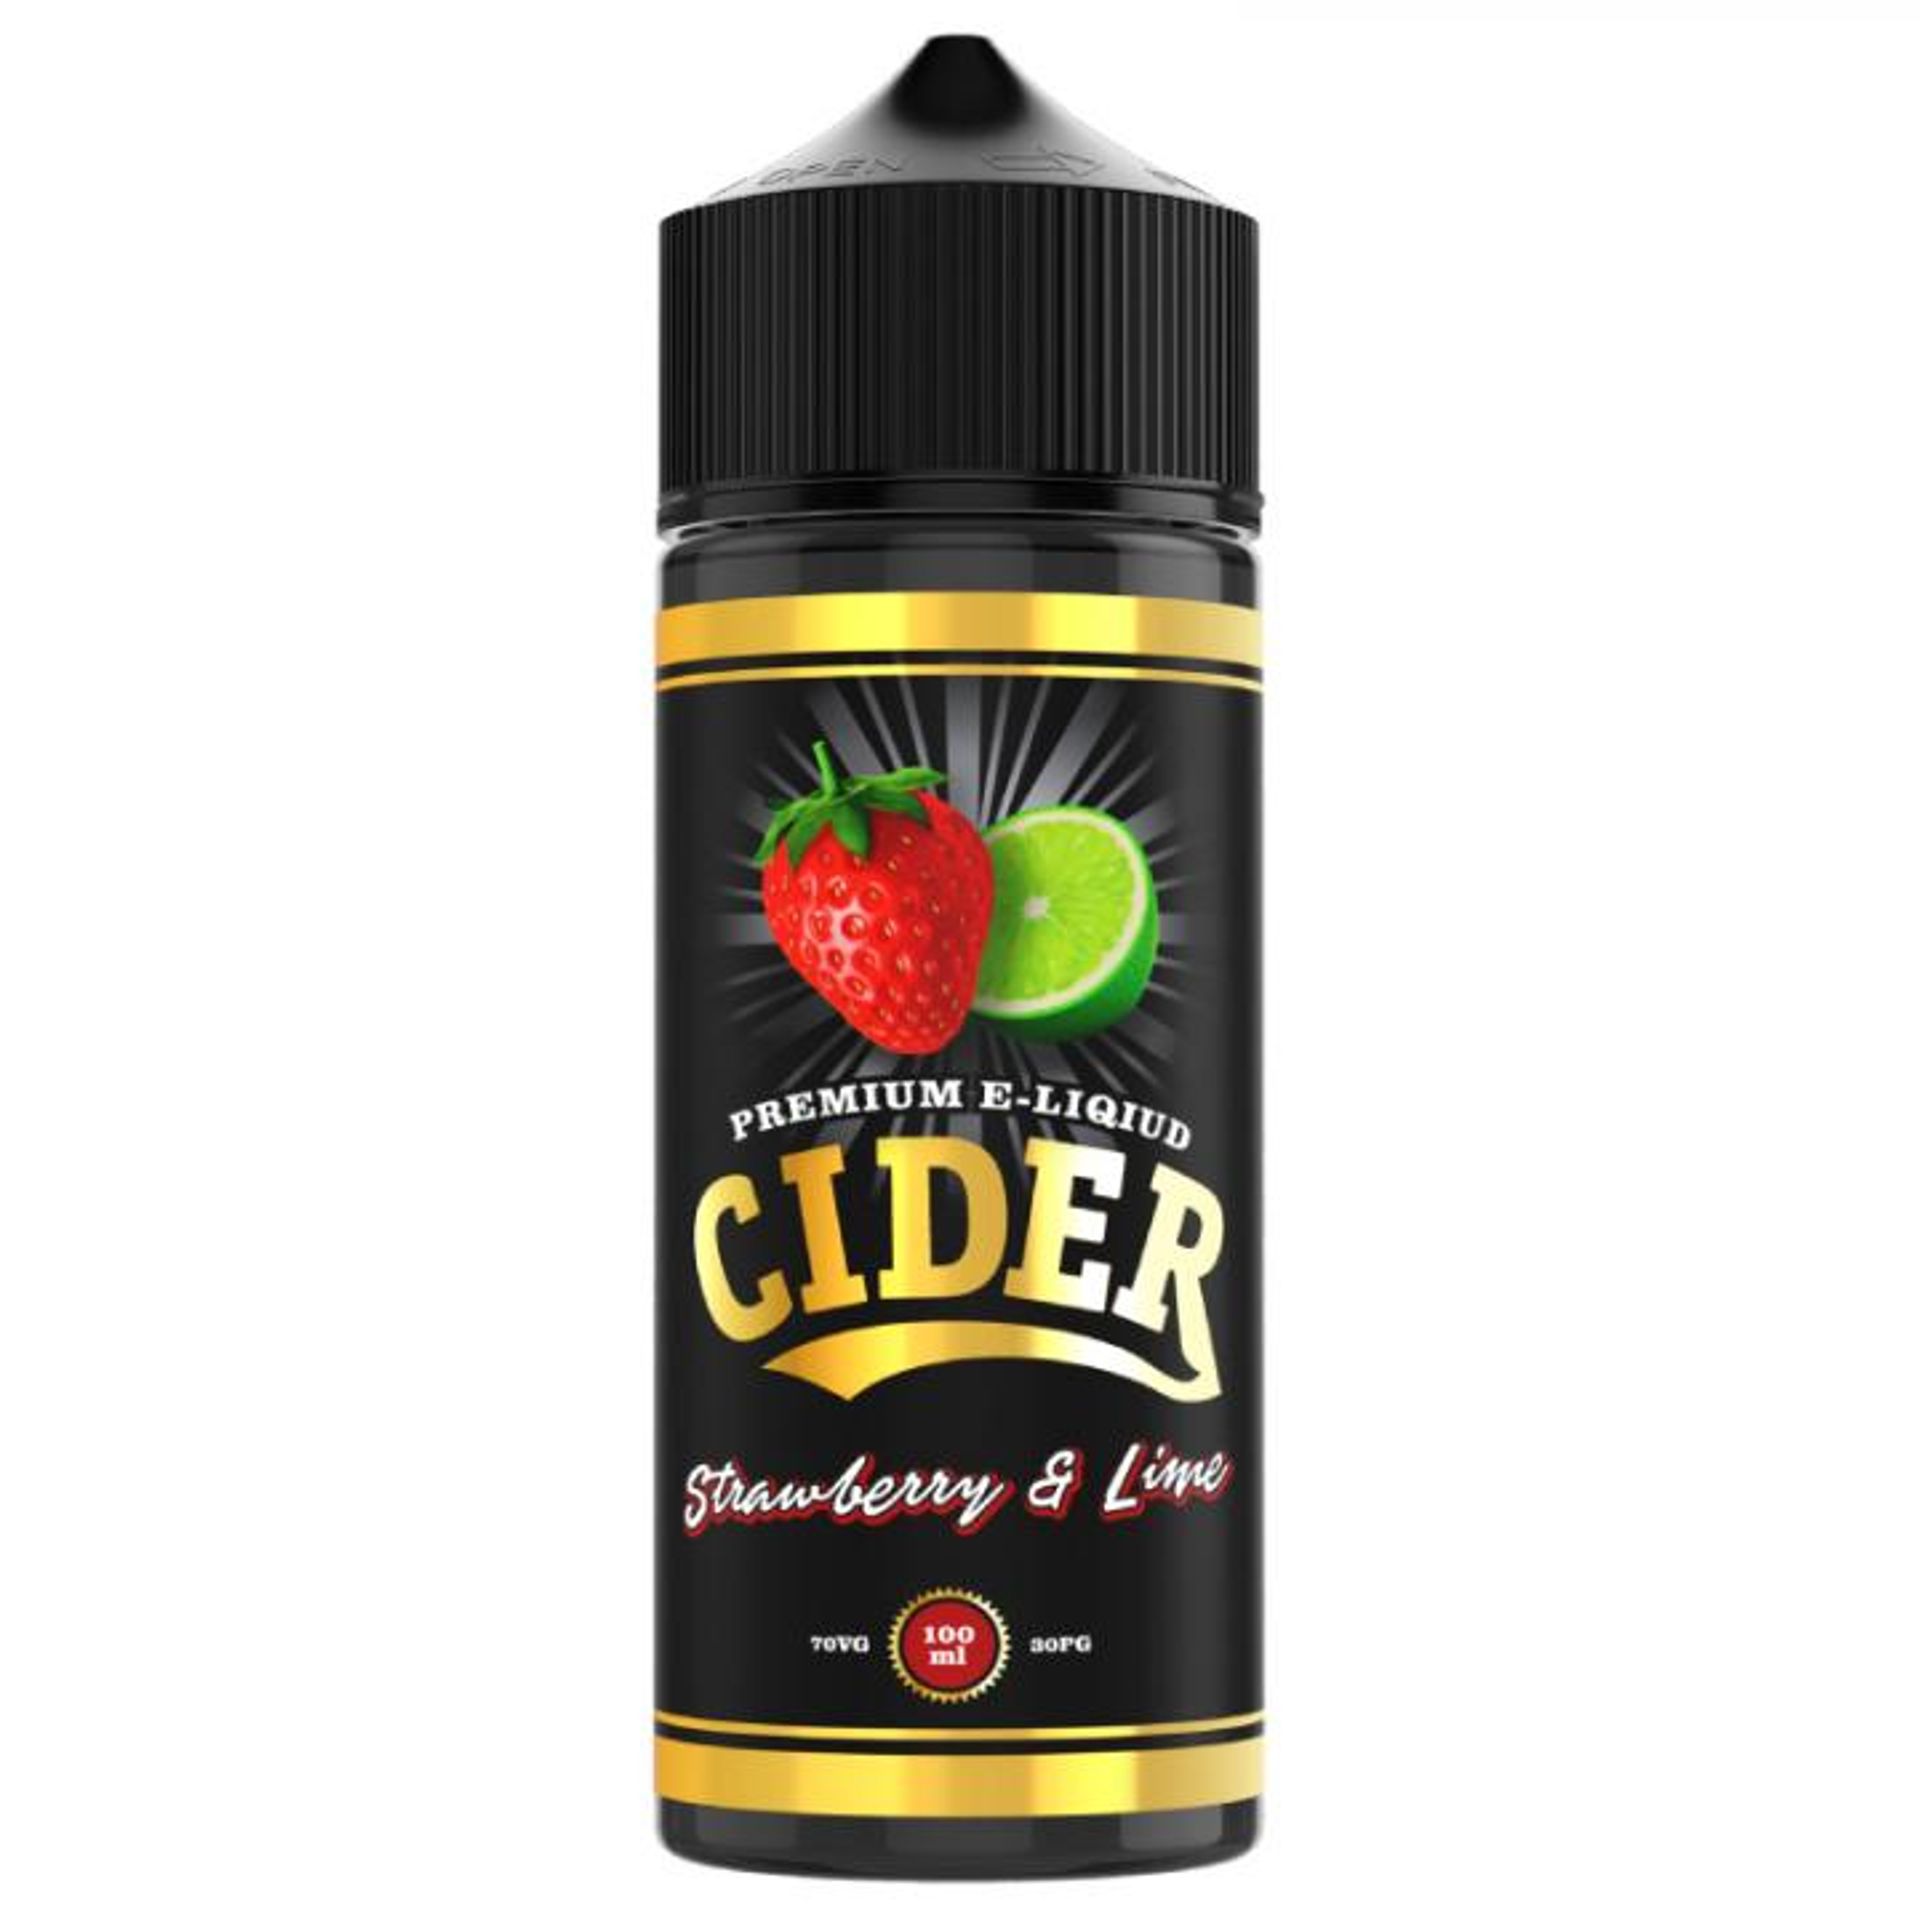 Image of Strawberry & Lime by Cider